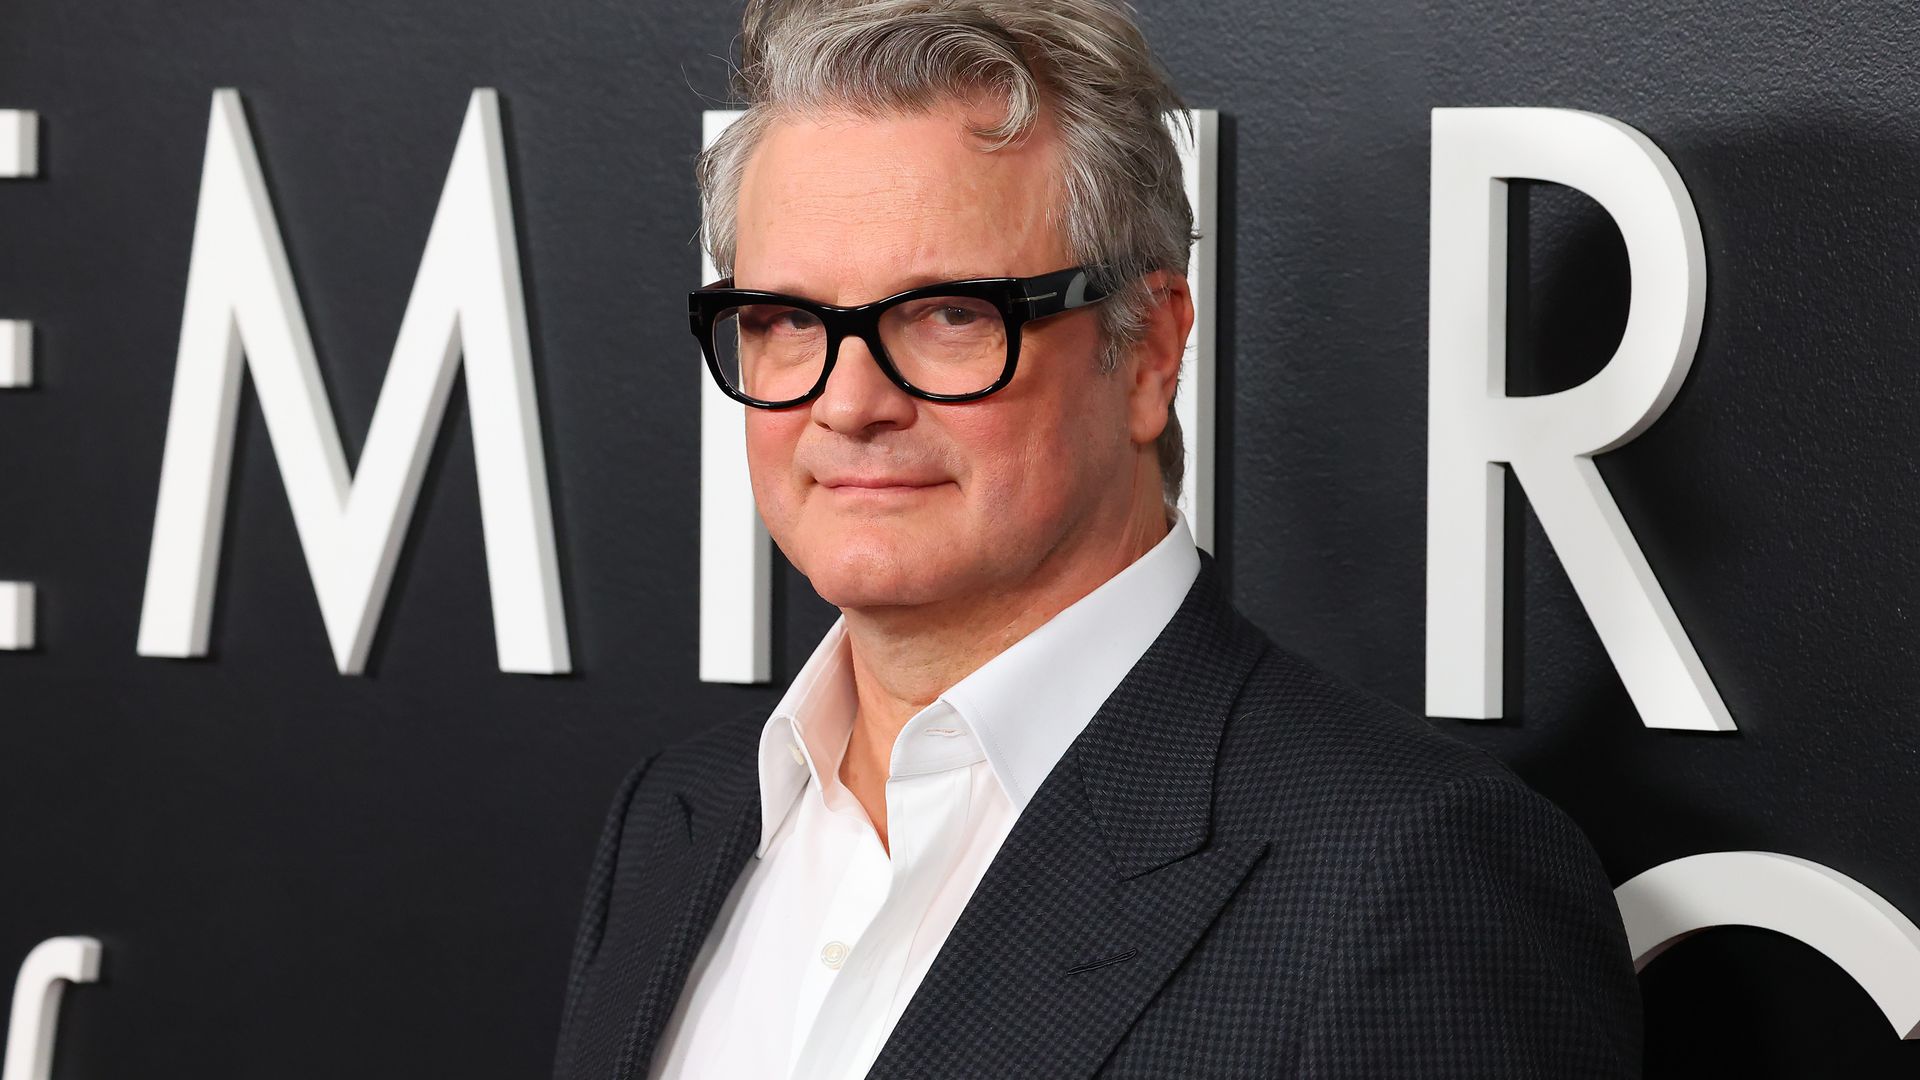 BEVERLY HILLS, CALIFORNIA - DECEMBER 01: Colin Firth attends Los Angeles premiere of Fox Searchlight Pictures "Empire of Light" at Samuel Goldwyn Theater on December 01, 2022 in Beverly Hills, California. (Photo by Leon Bennett/Getty Images)